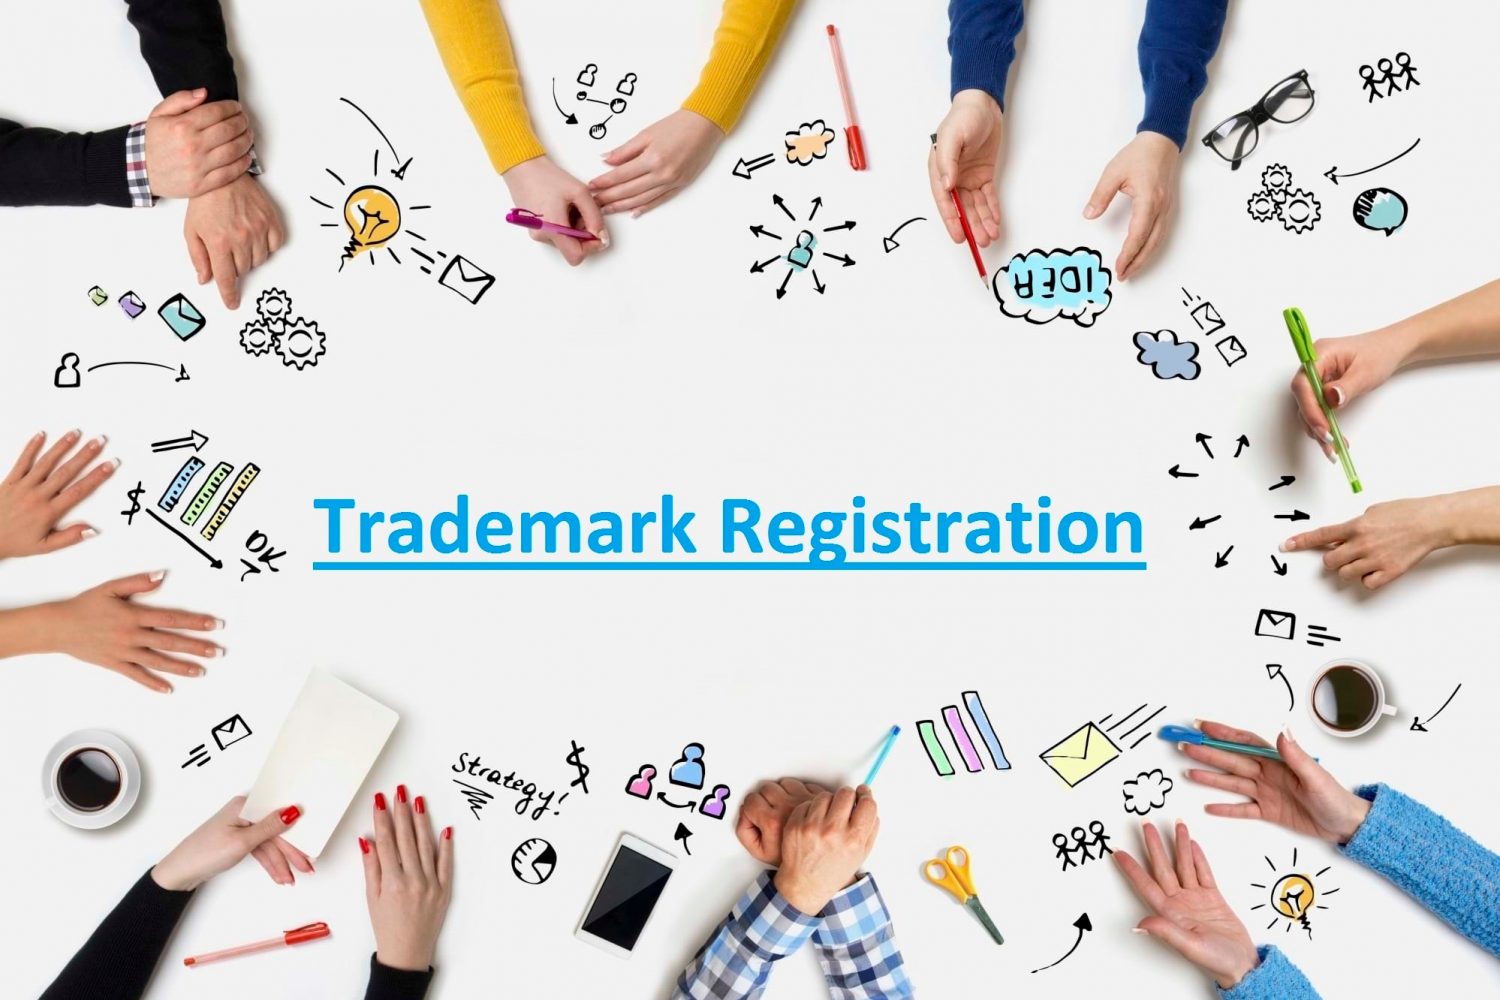 Important points of trademark registration